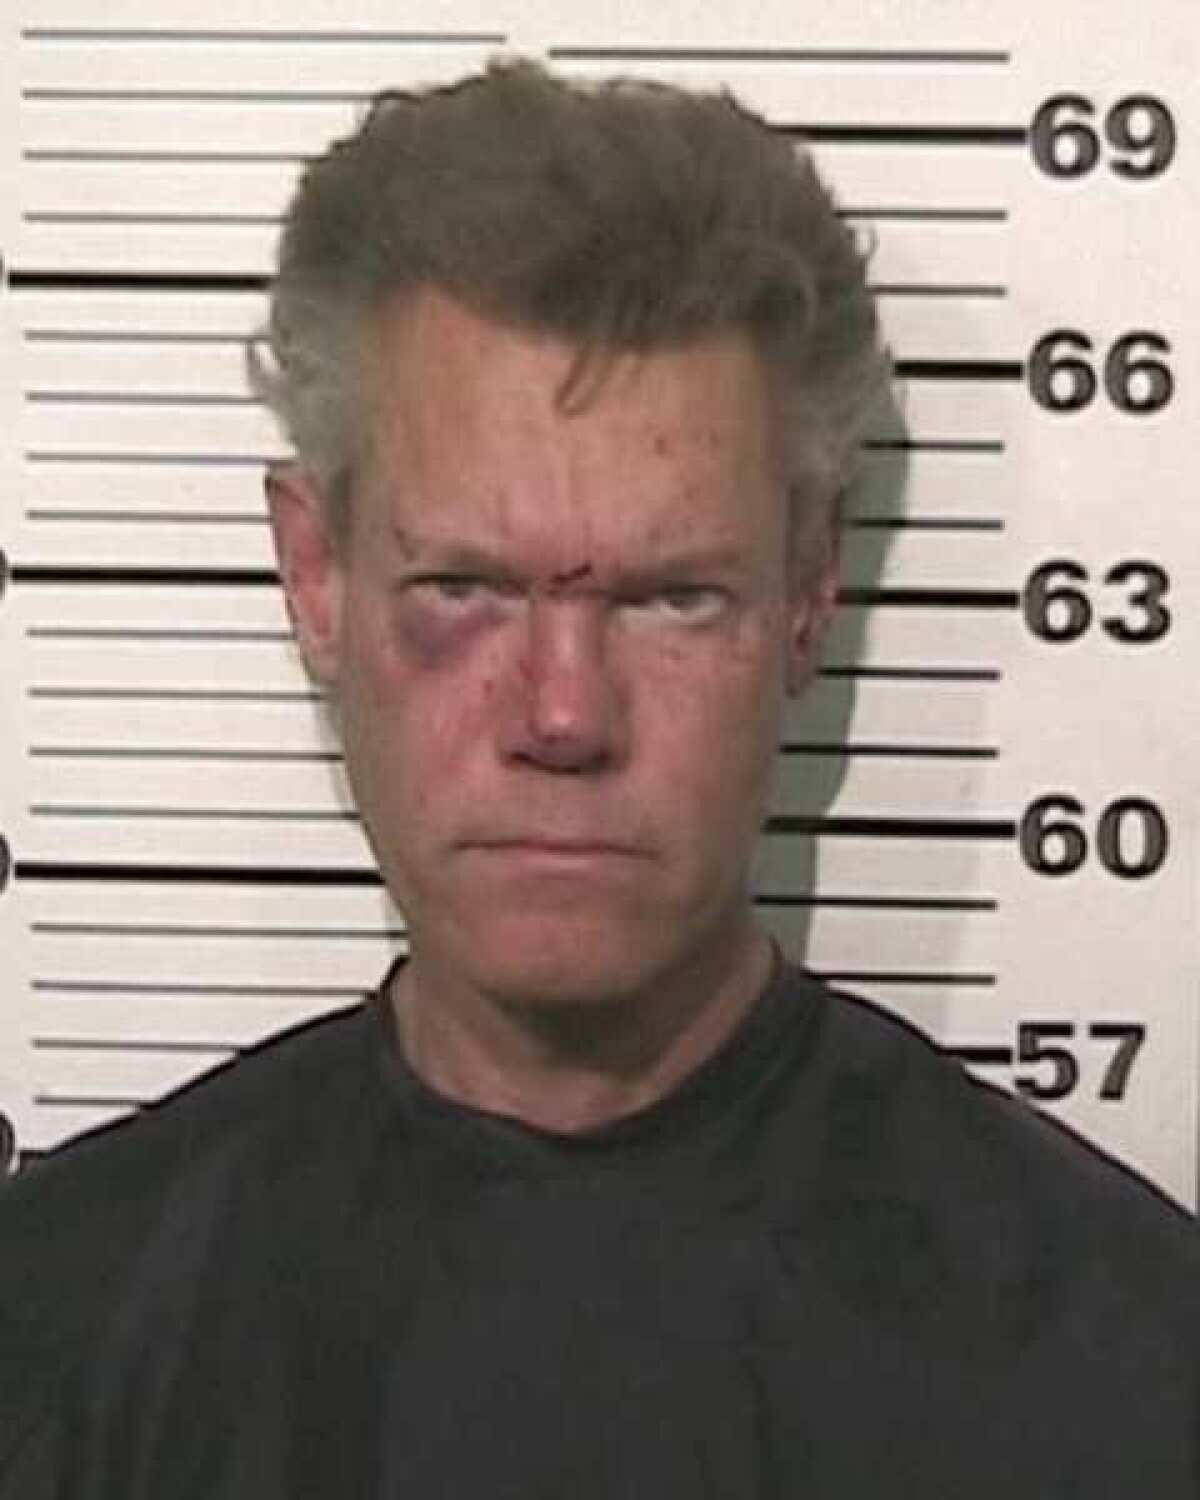 Randy Travis, in his booking photo after his drunk-driving arrest last week in Texas.